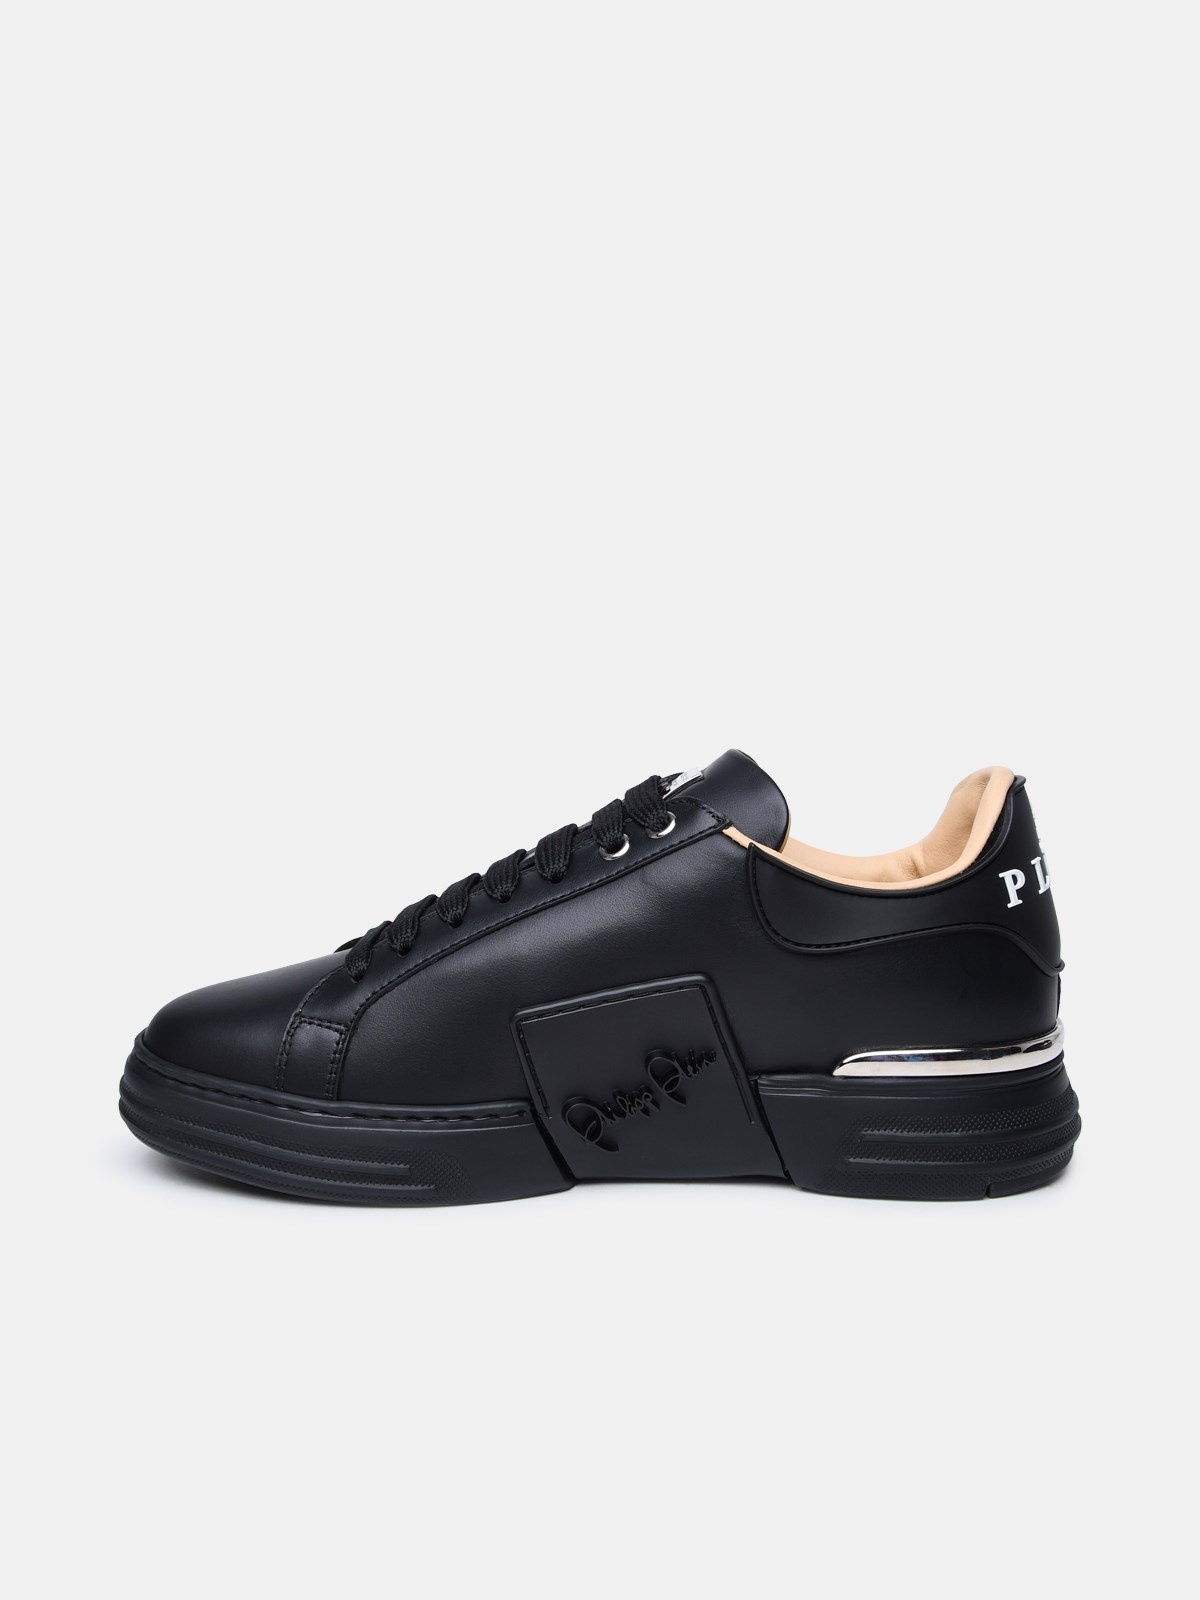 Exagon sneakers in black nappa leather - 3